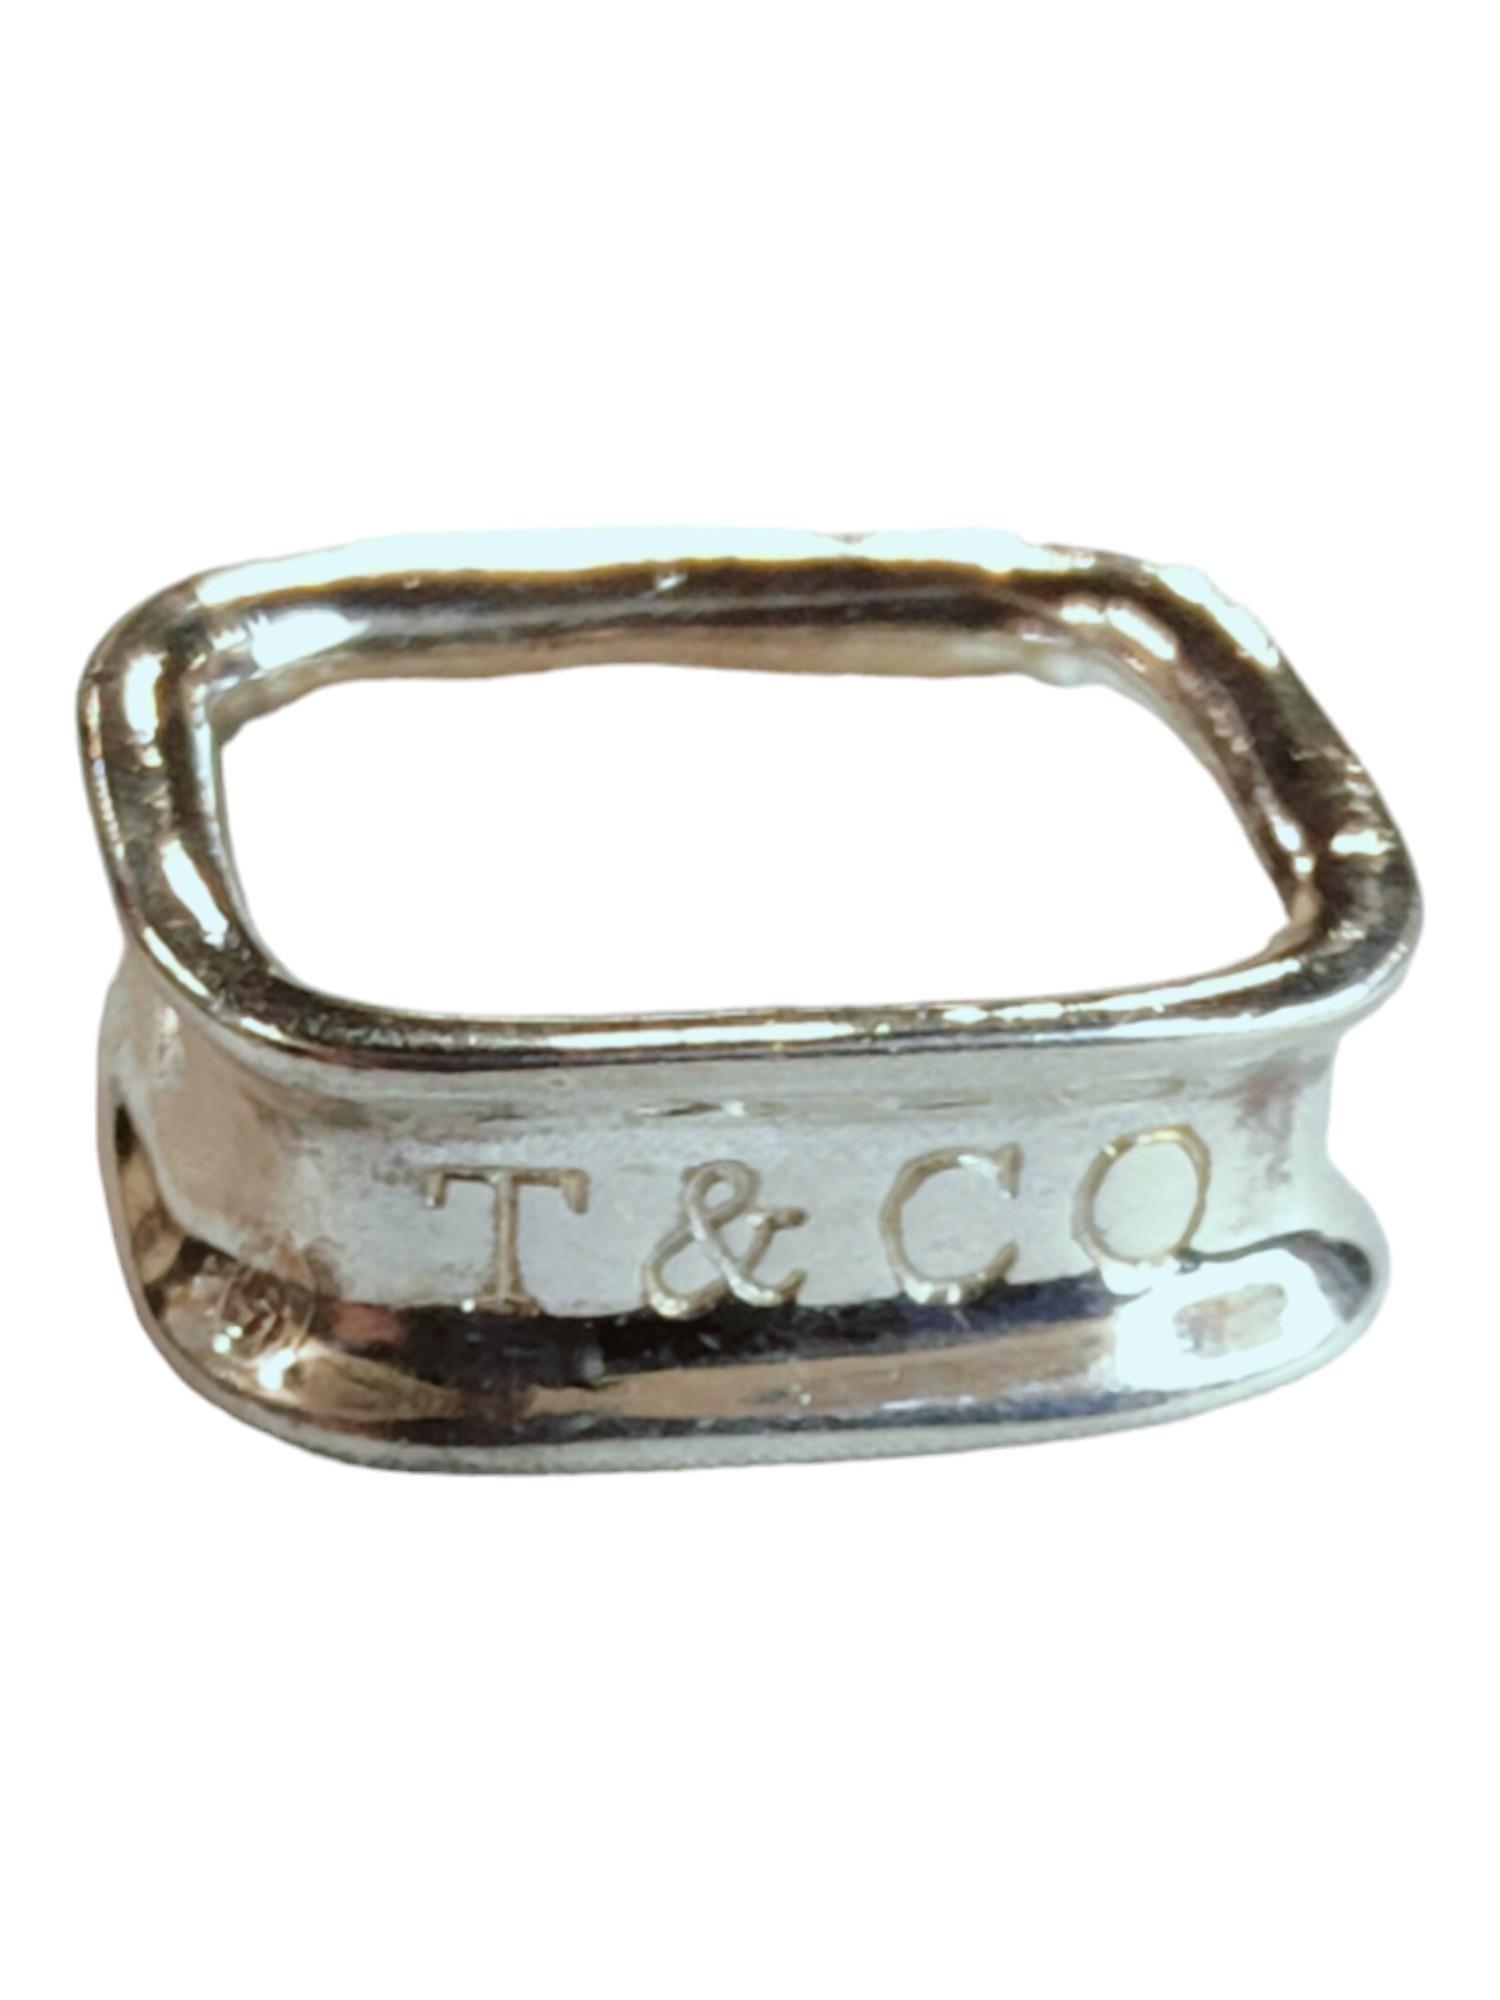 SILVER TIFFANY & CO STYLE RING